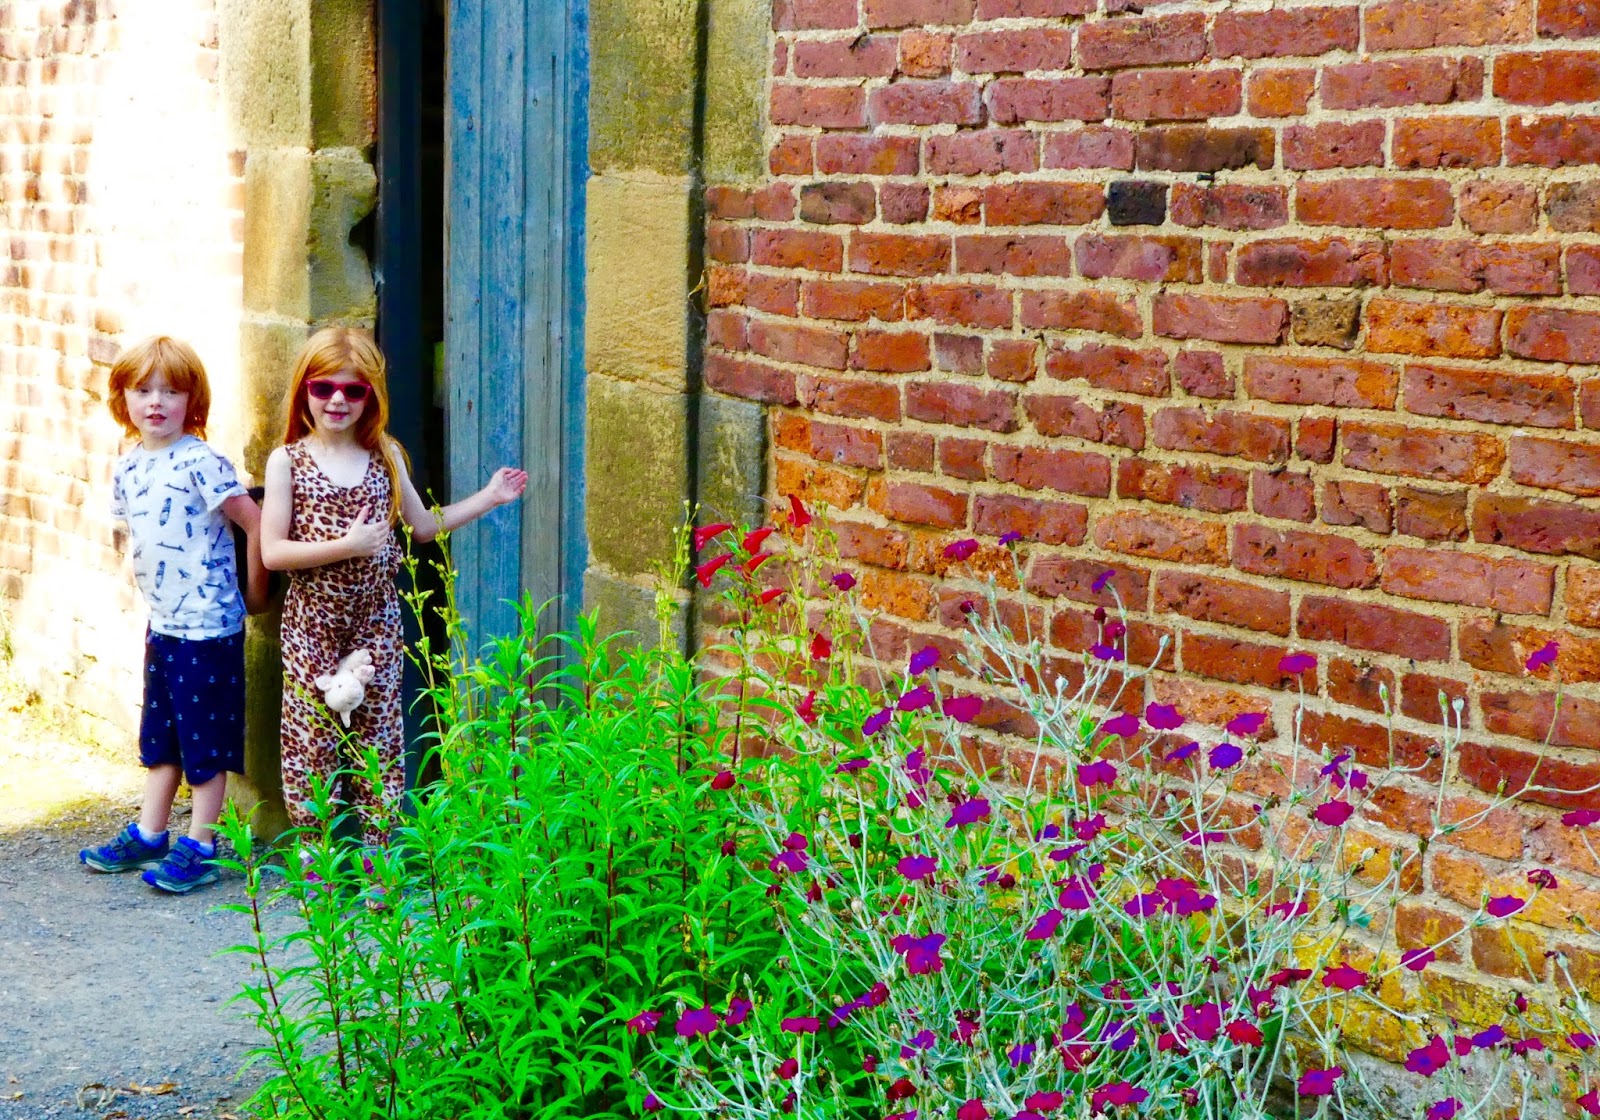 Gibside - A North East National Trust Property that's ideal for Picnics, Adventure Playground fun and beautiful gardens - Walled Garden